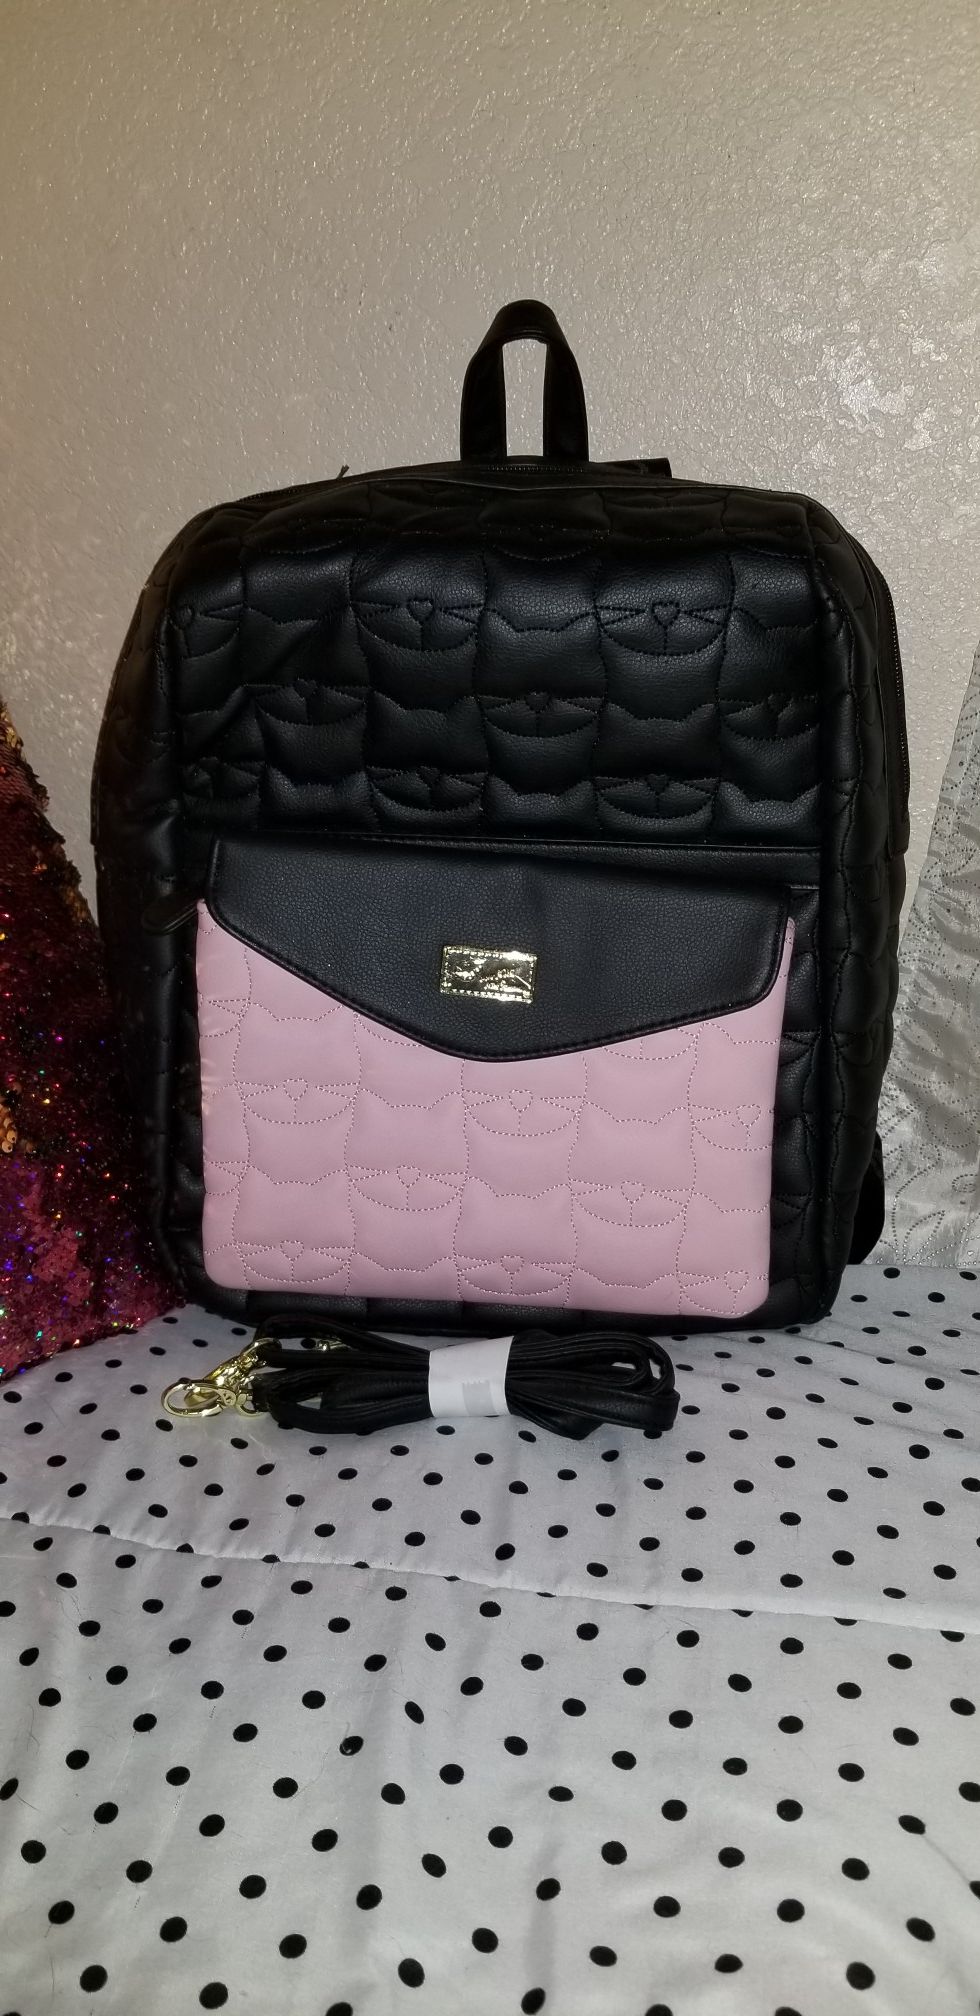 Betsey Johnson backpack purse (2 in 1...pink pouch detaches)